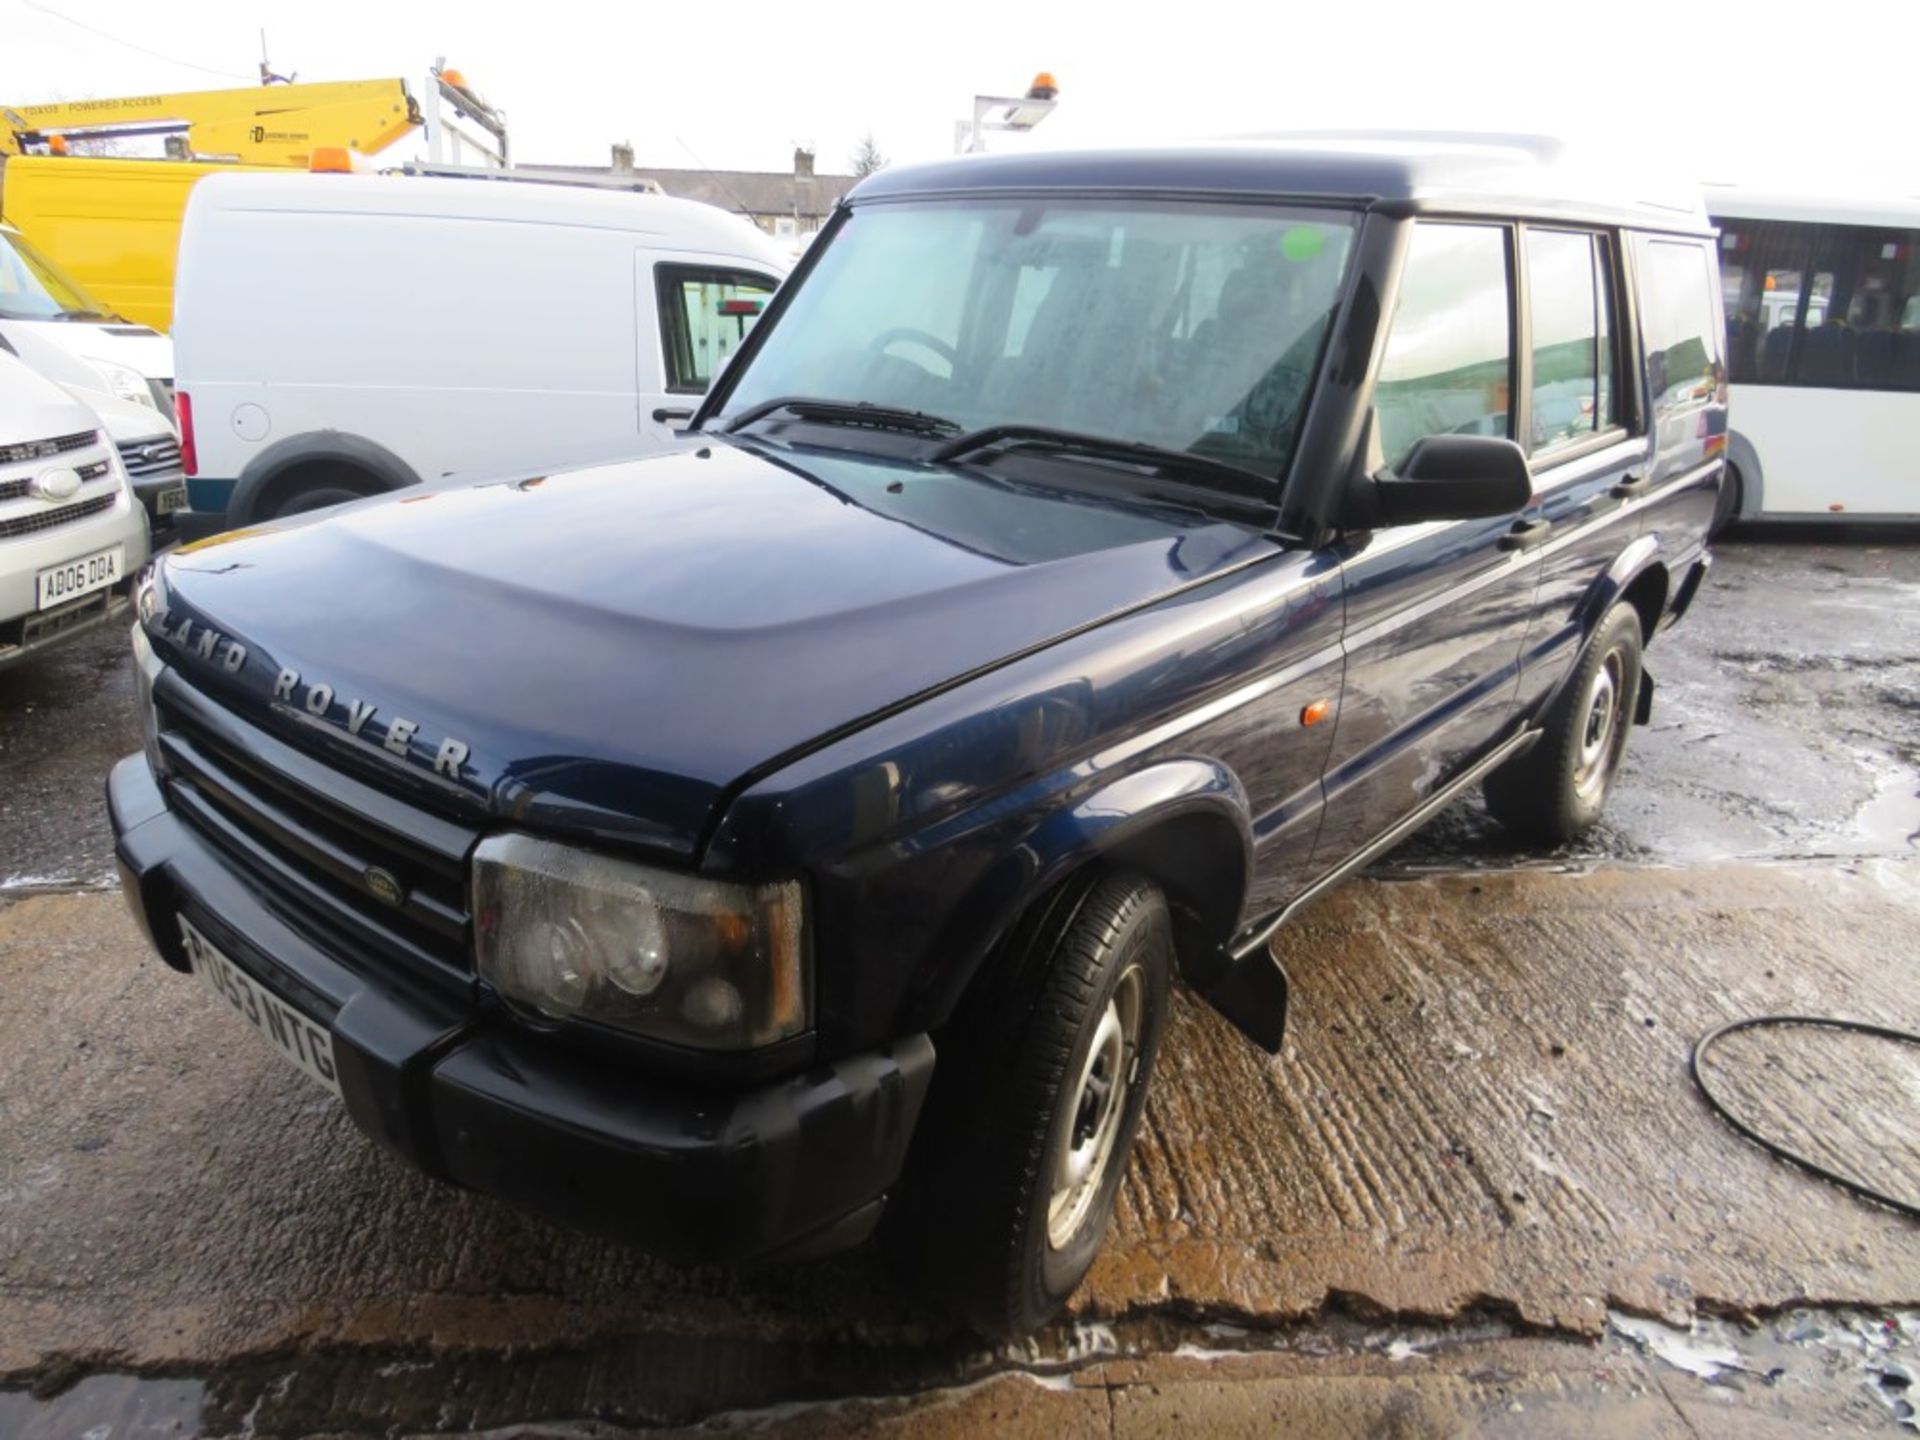 53 reg LAND ROVER DISCOVERY TD5 E (DIRECT COUNCIL) 1ST REG 09/03, 85170M, V5 HERE, 1 - Image 2 of 6